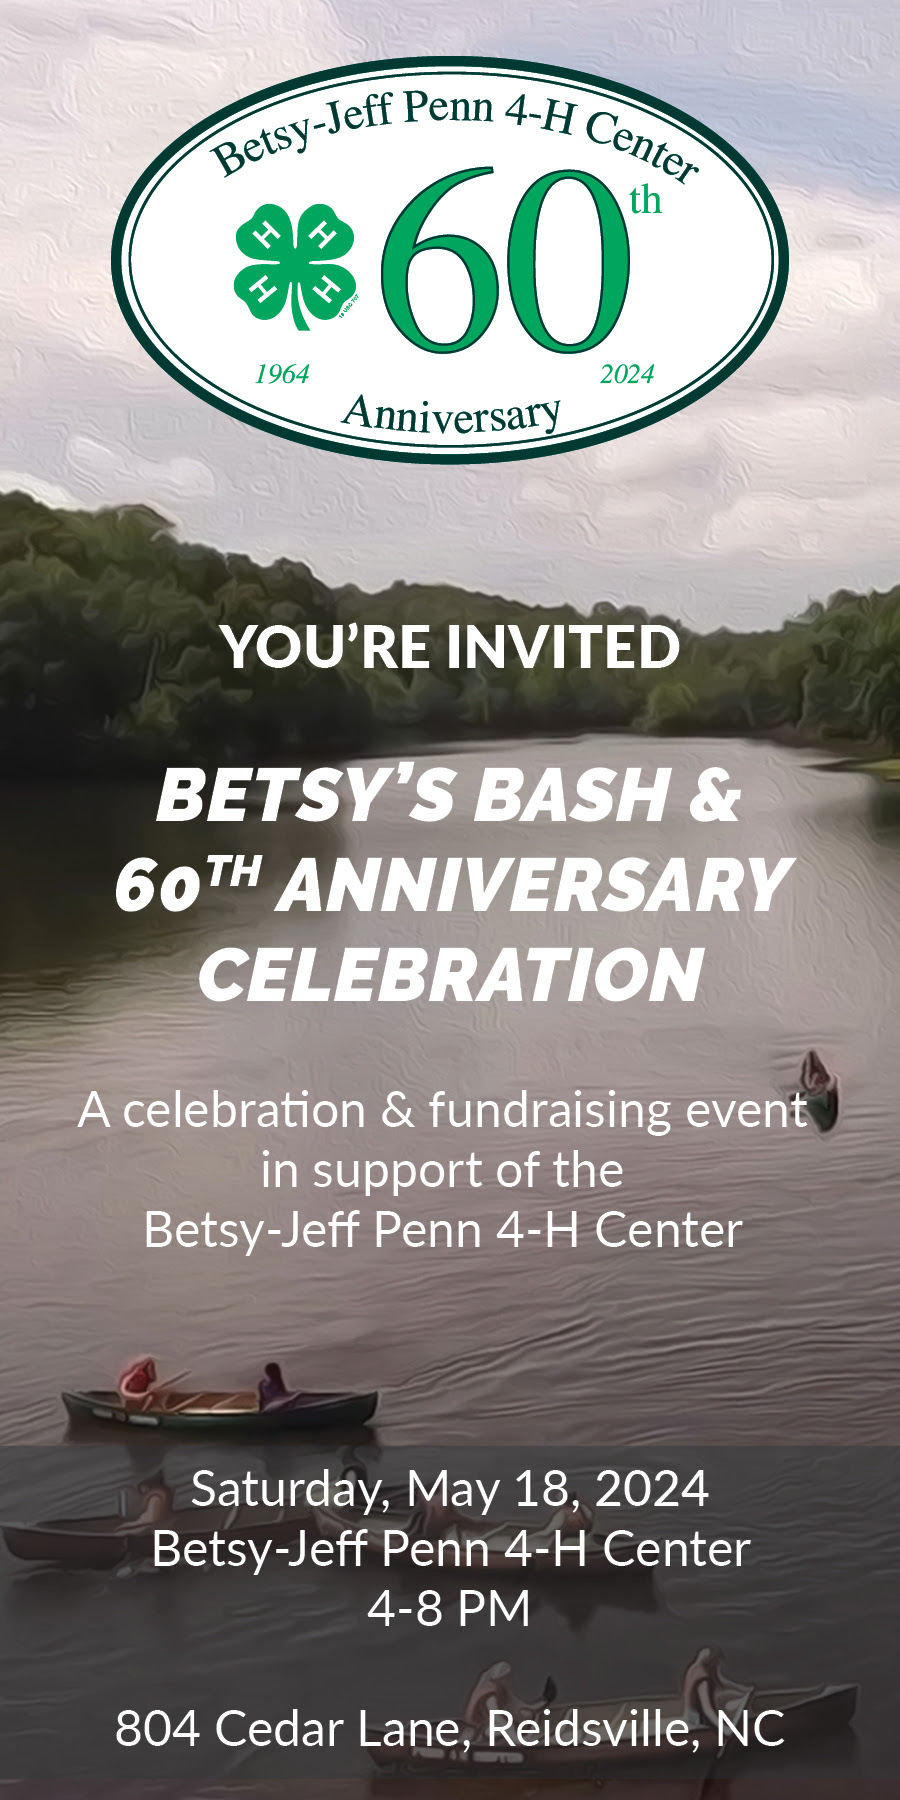 Invitation to Betsy's Bash with the Center logo that reads "You're Invited. Betsy's Bash & 60th Anniversary Celebration. A celebration & fundraising event in support of the Betsy-Jeff Penn 4-H Center. Saturday, May 18th, 2024. Betsy-Jeff Penn 4-H Center. 4-8pm. 804 Cedar Lane, Reidsville, NC.